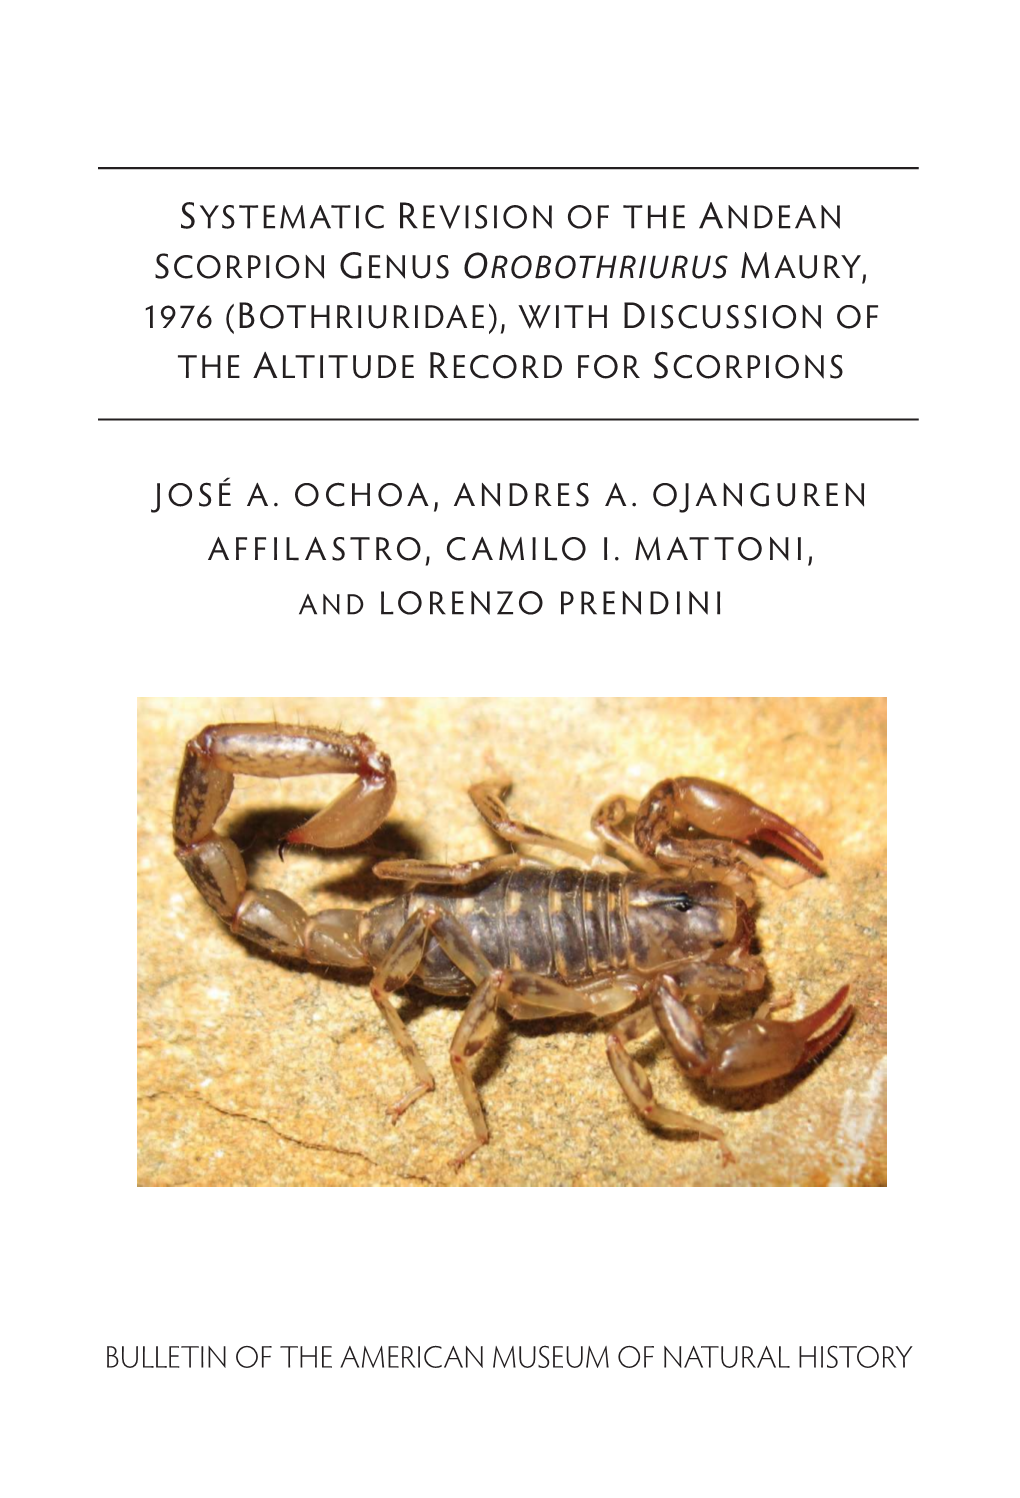 Systematic Revision of the Andean Scorpion Genus Orobothriurus Maury, 1976 (Bothriuridae), with Discussion of the Altitude Record for Scorpions